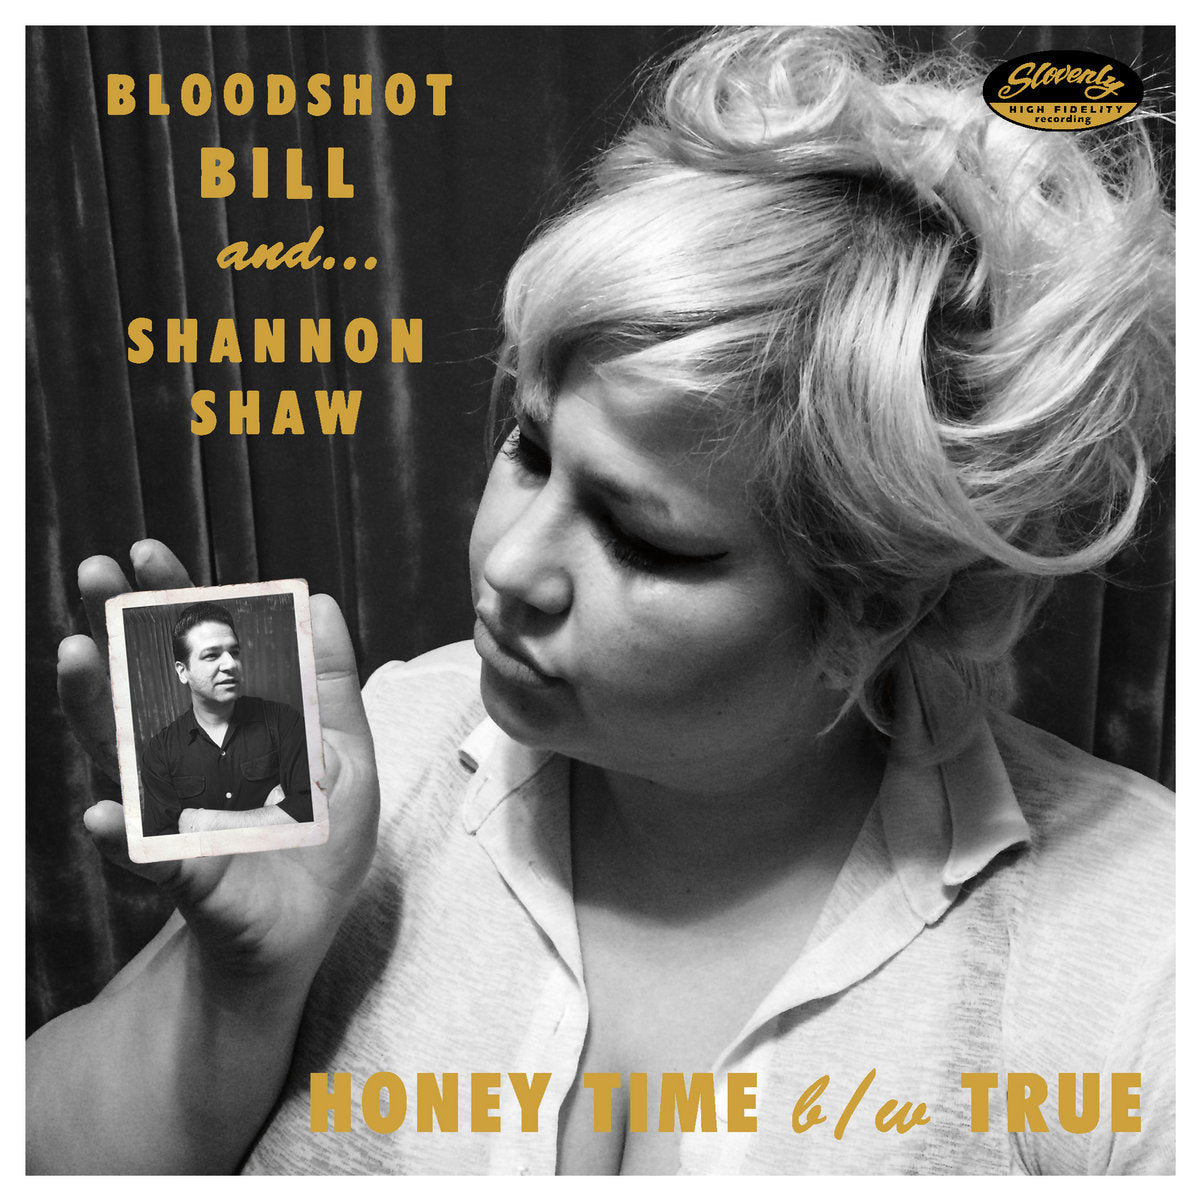 SHANNON SHAW AND BLOODSHOT BILL "HONEY TIME"